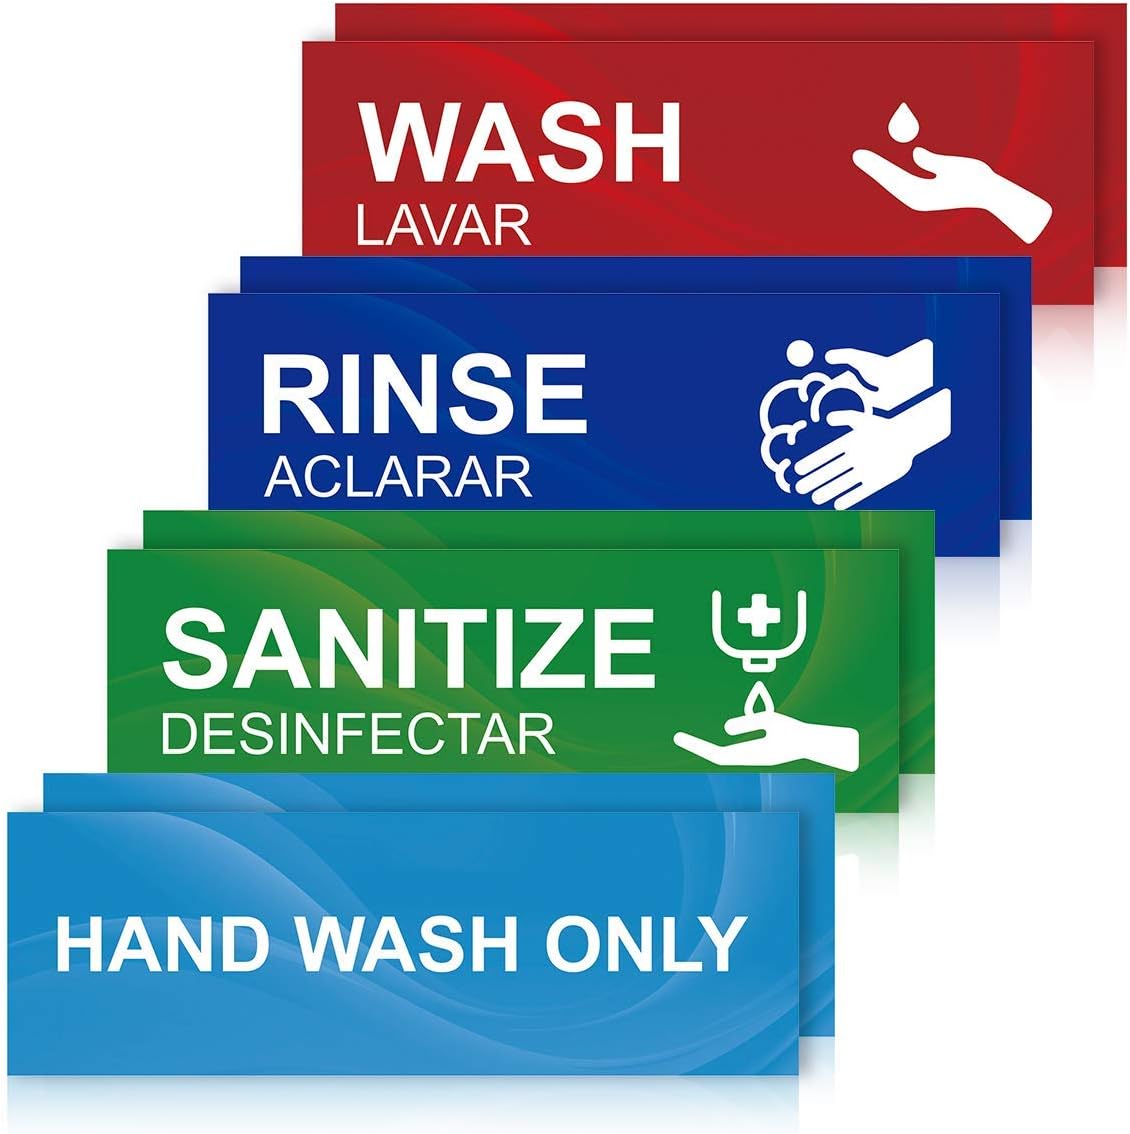 magicfour-wash-rinse-sanitize-sink-labels-hand-wash-only-sign-8-pack-3-compartment-sink